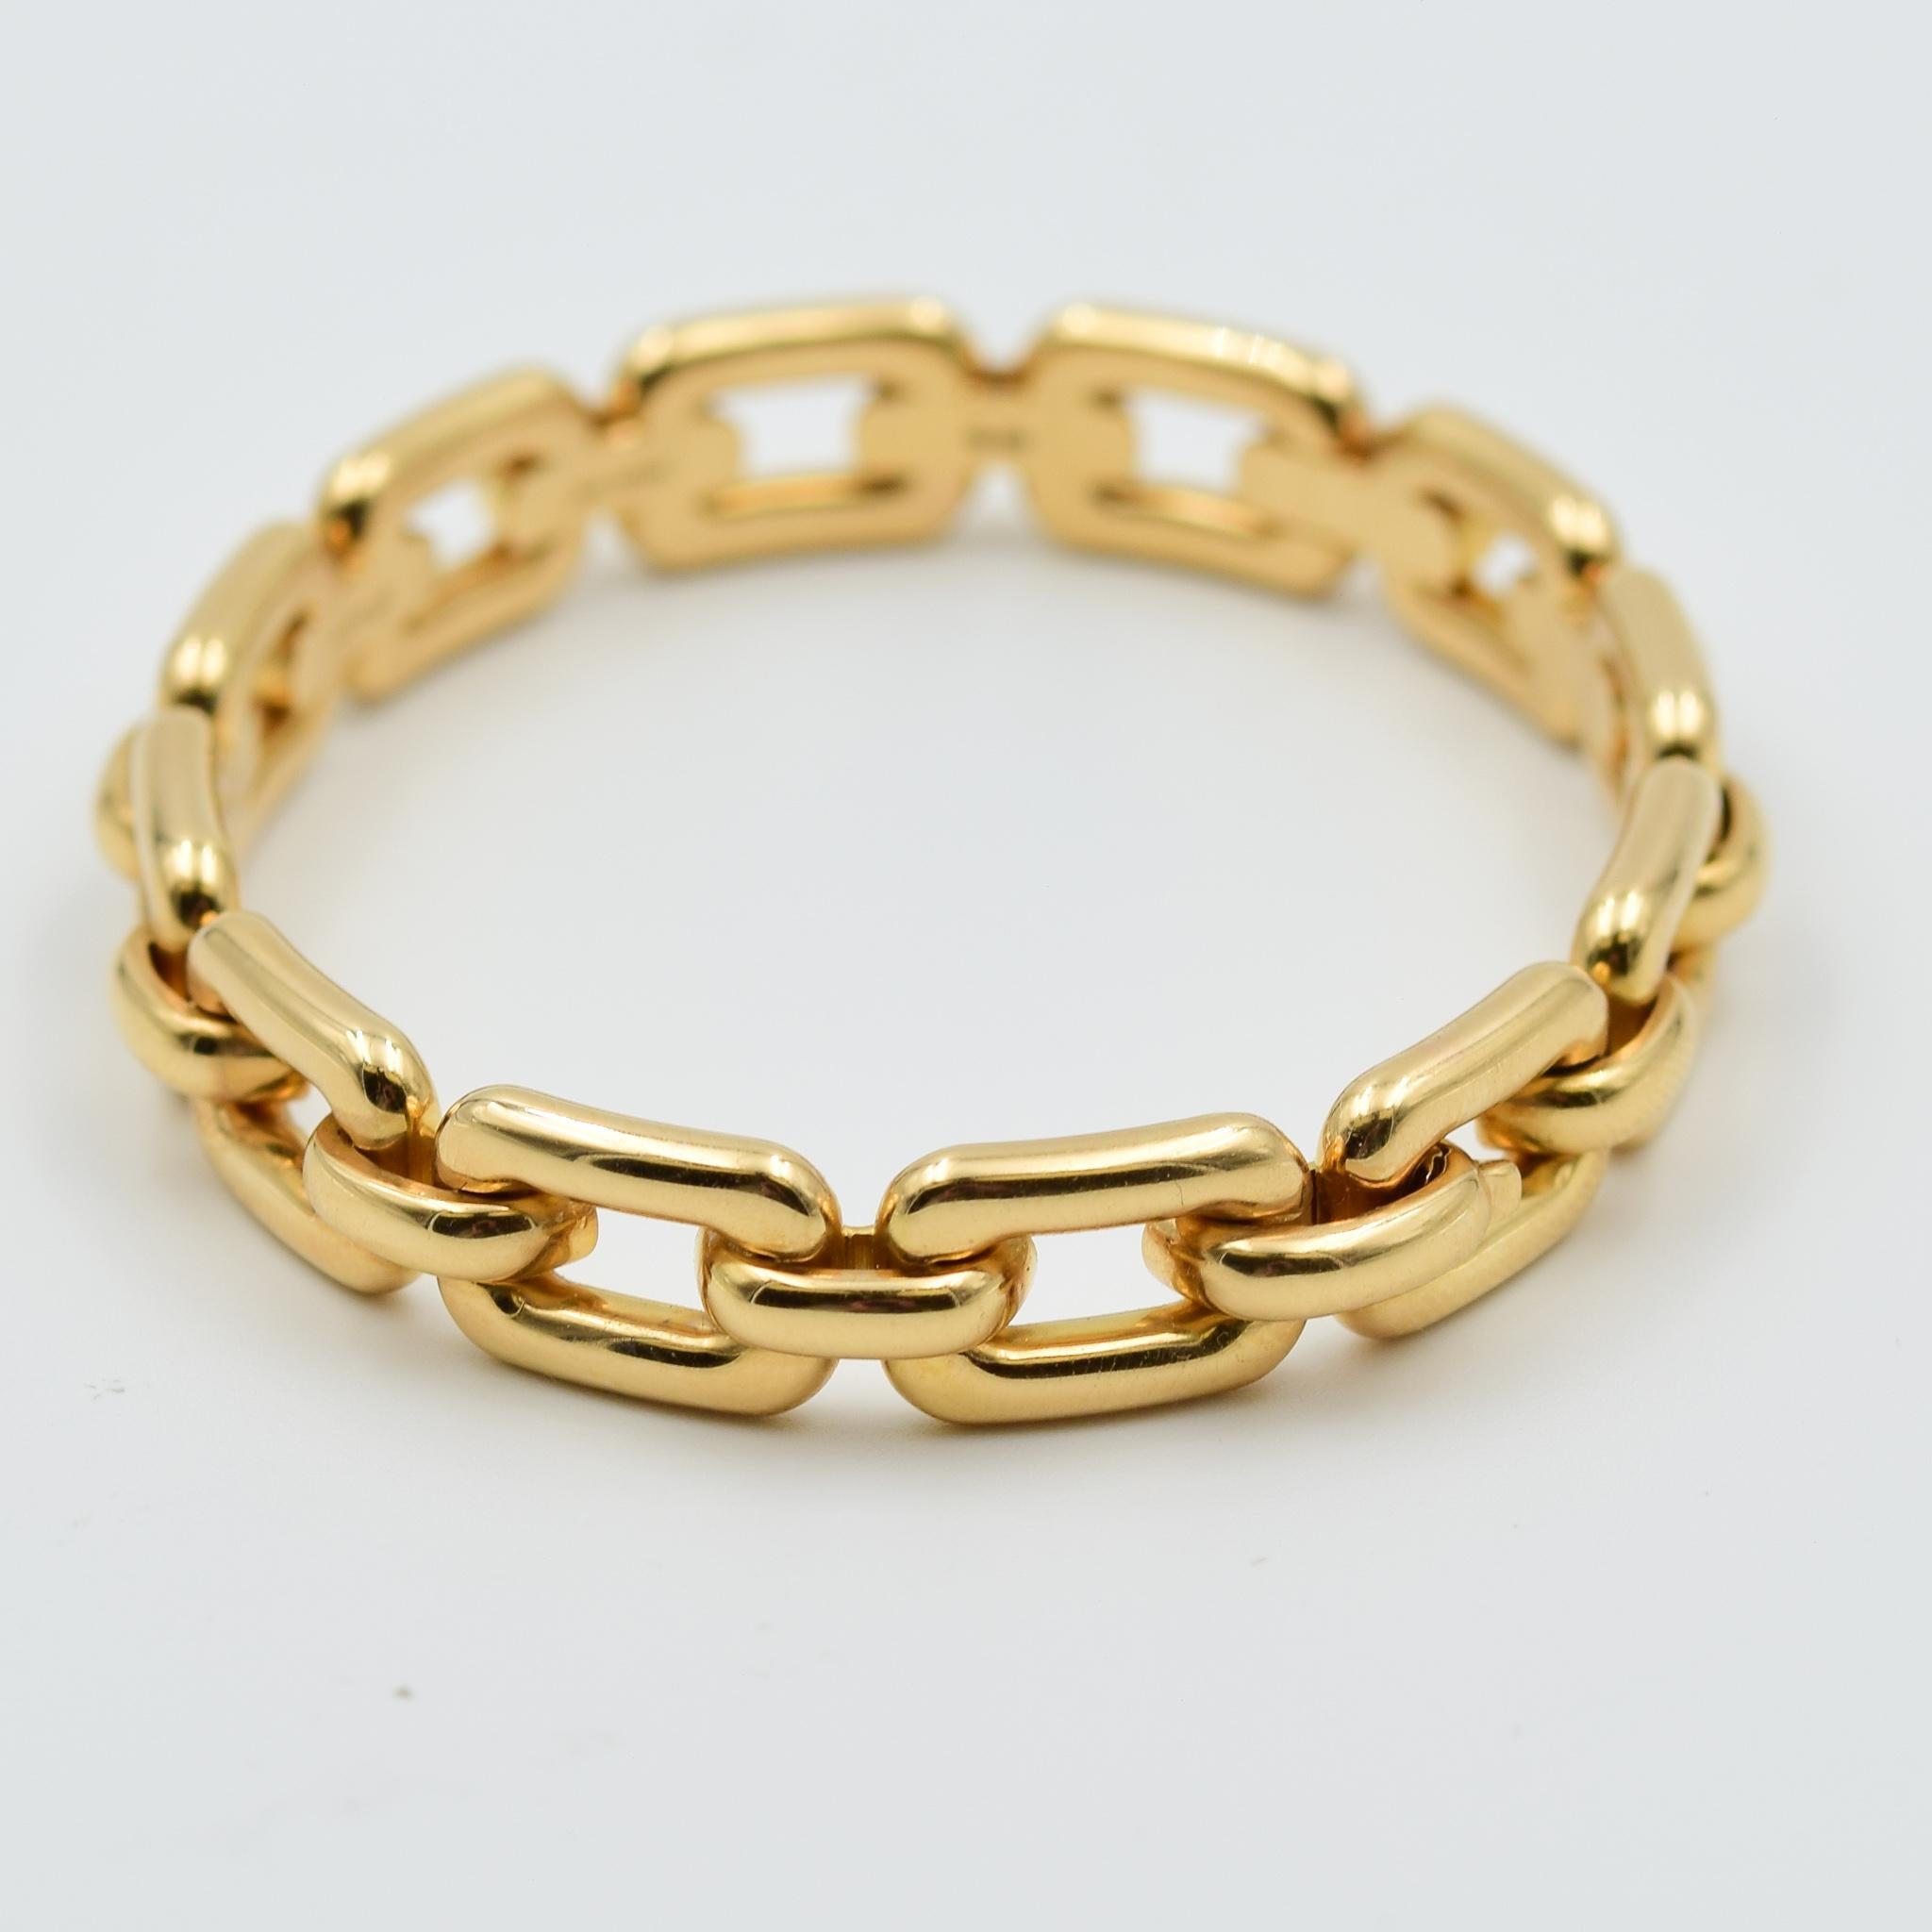 This Ralph Lauren Chunky Chain Link Bangle bracelet is a very fashionable design which can be worn independently or stacked with other stylish bracelets.  This is a bangle style with a hinge clasp which opens to easily fit to the wrist.  The oval